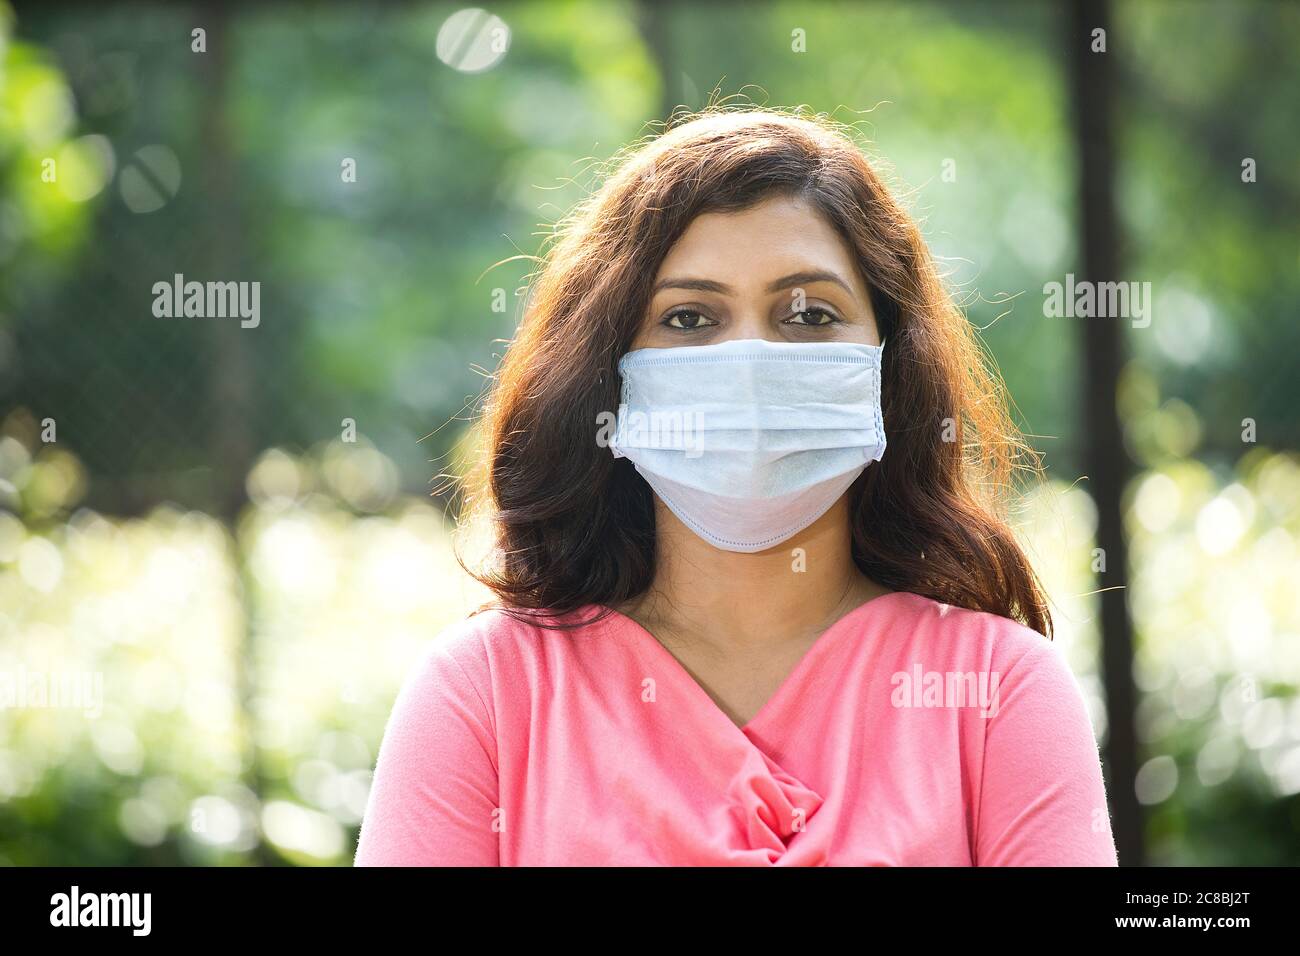 Woman with protective face mask at park Stock Photo